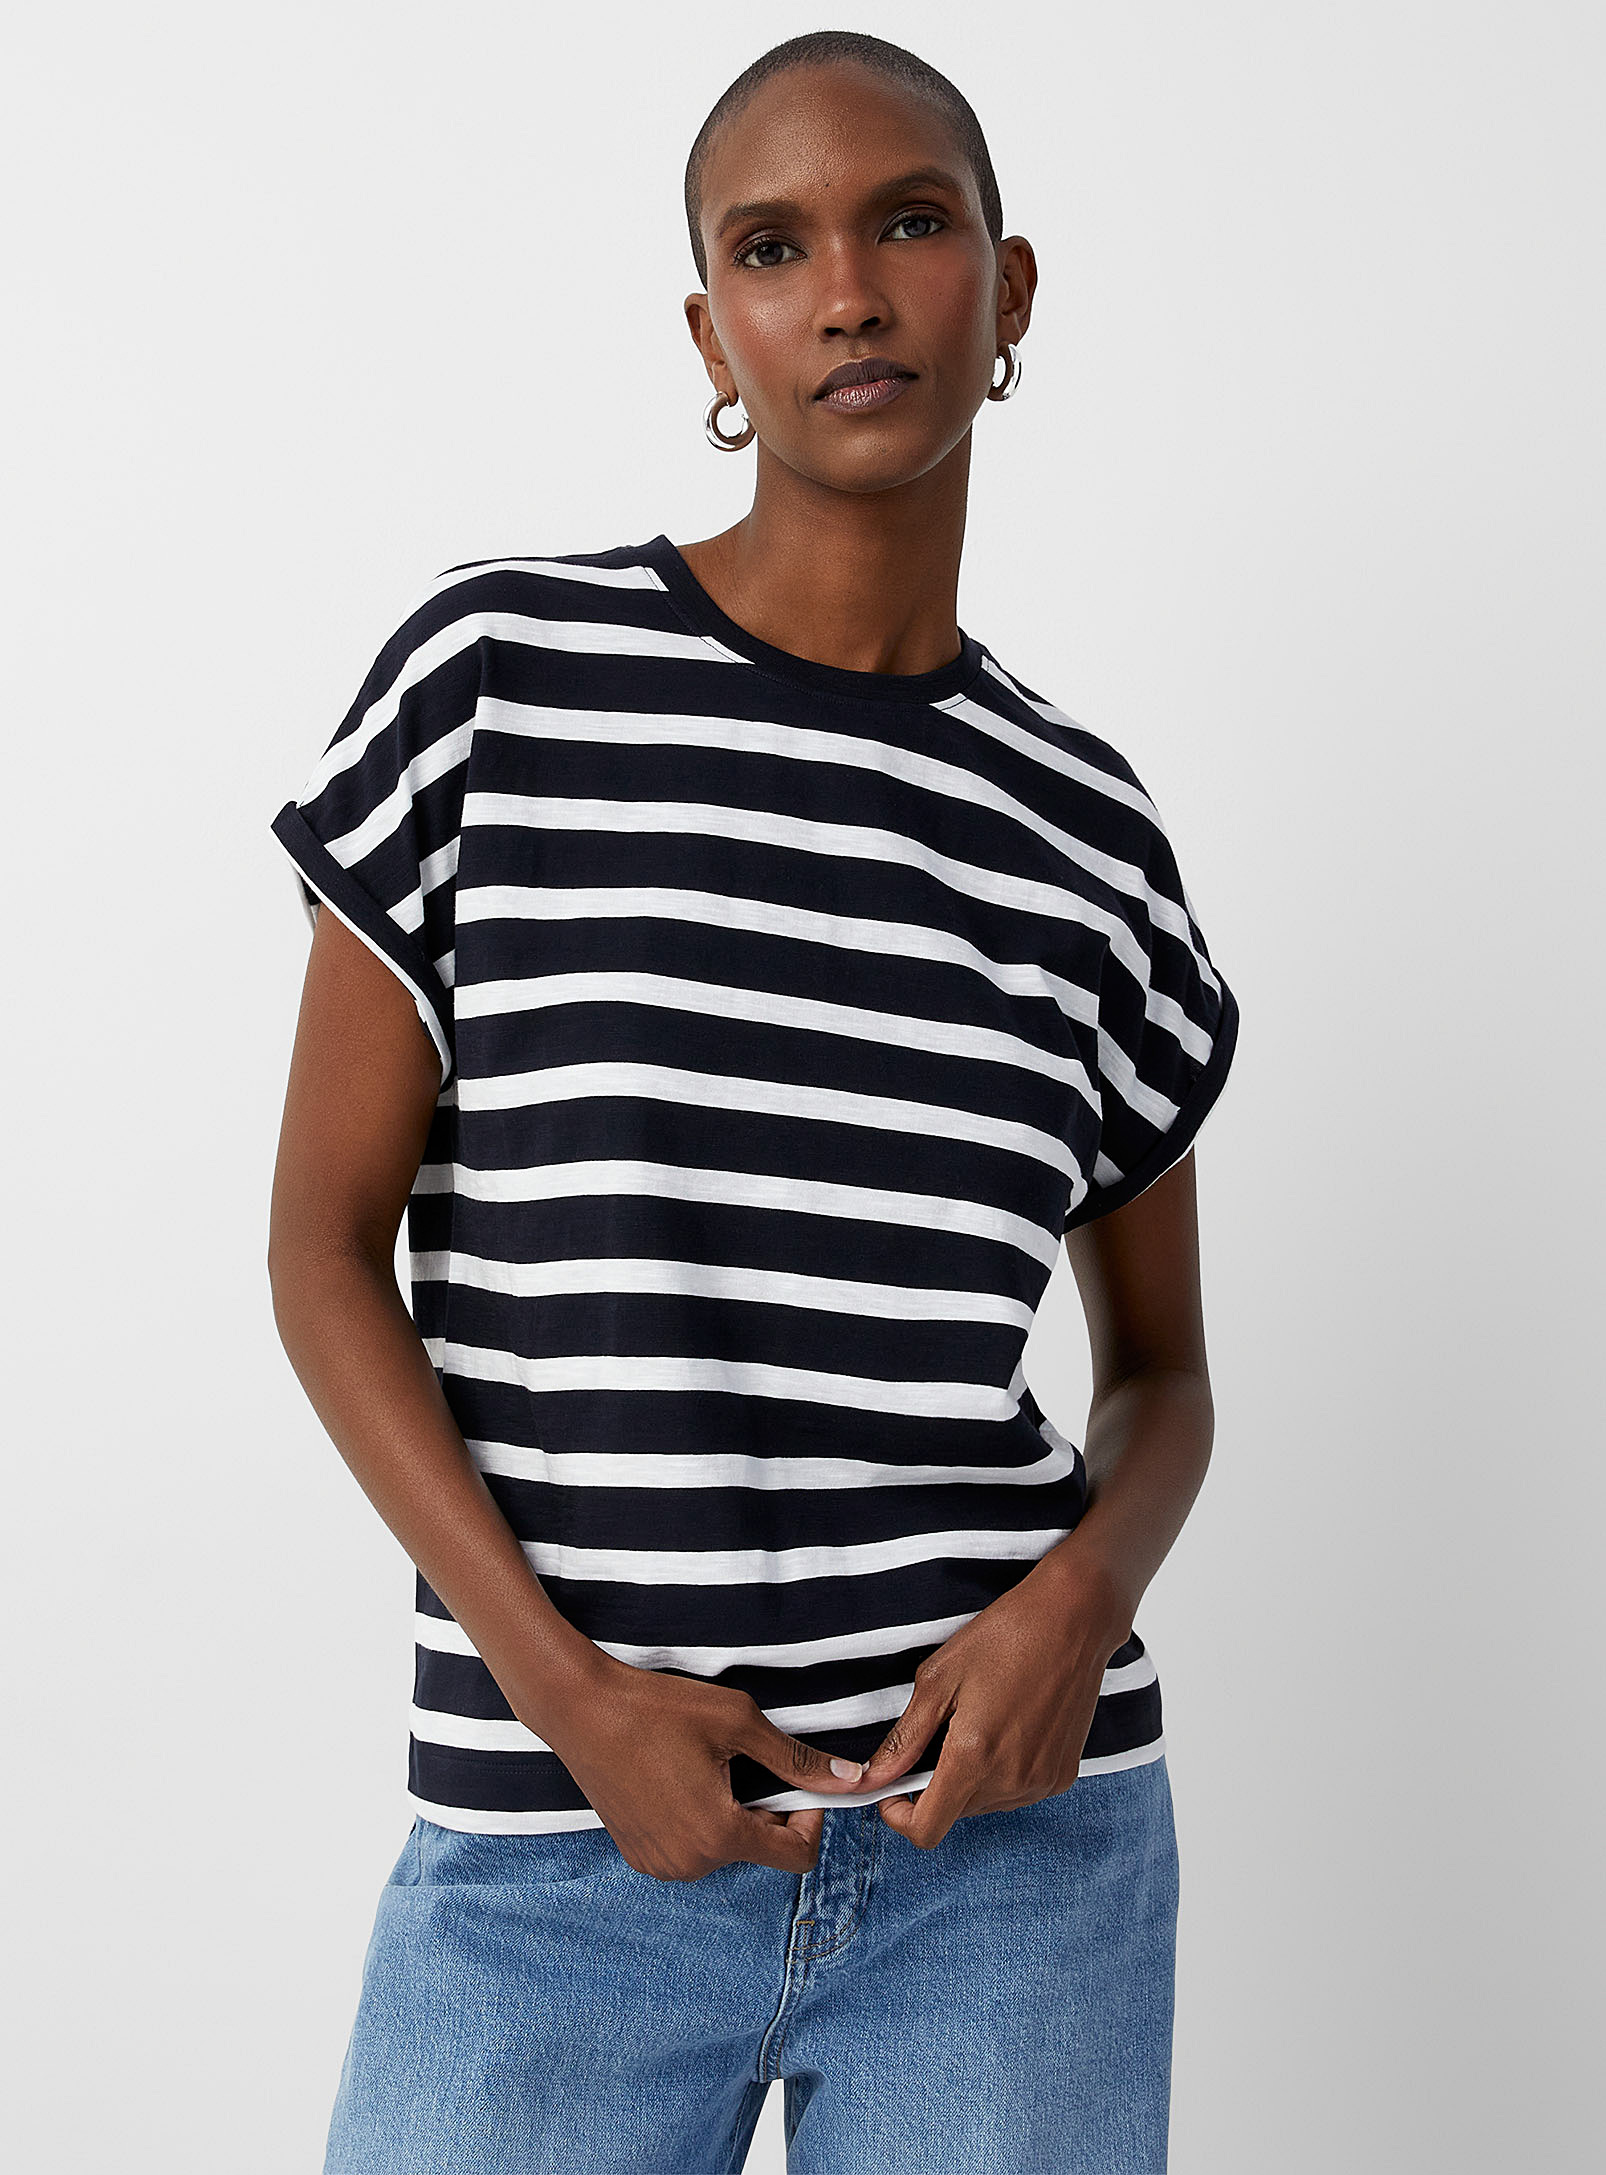 Contemporaine Horizontal Stripe Cap-sleeve T-shirt In Patterned Blue